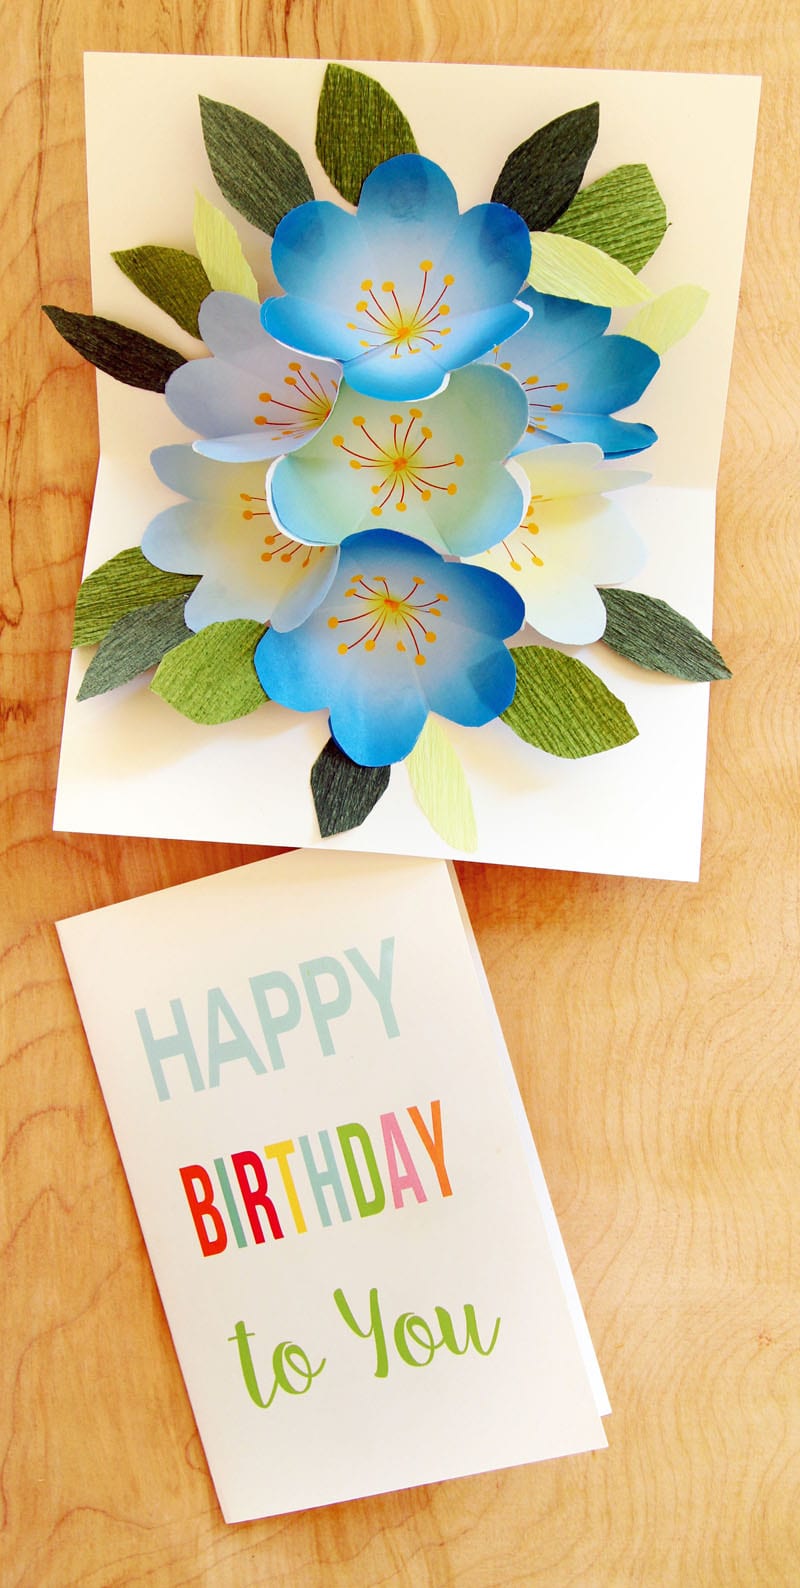 Handmade Birthday Card with Paper Flowers, Beautiful handmade greeting card  design with paper flowers and leaves that you can customize as a DIY birthday  card, mothers day card etc.